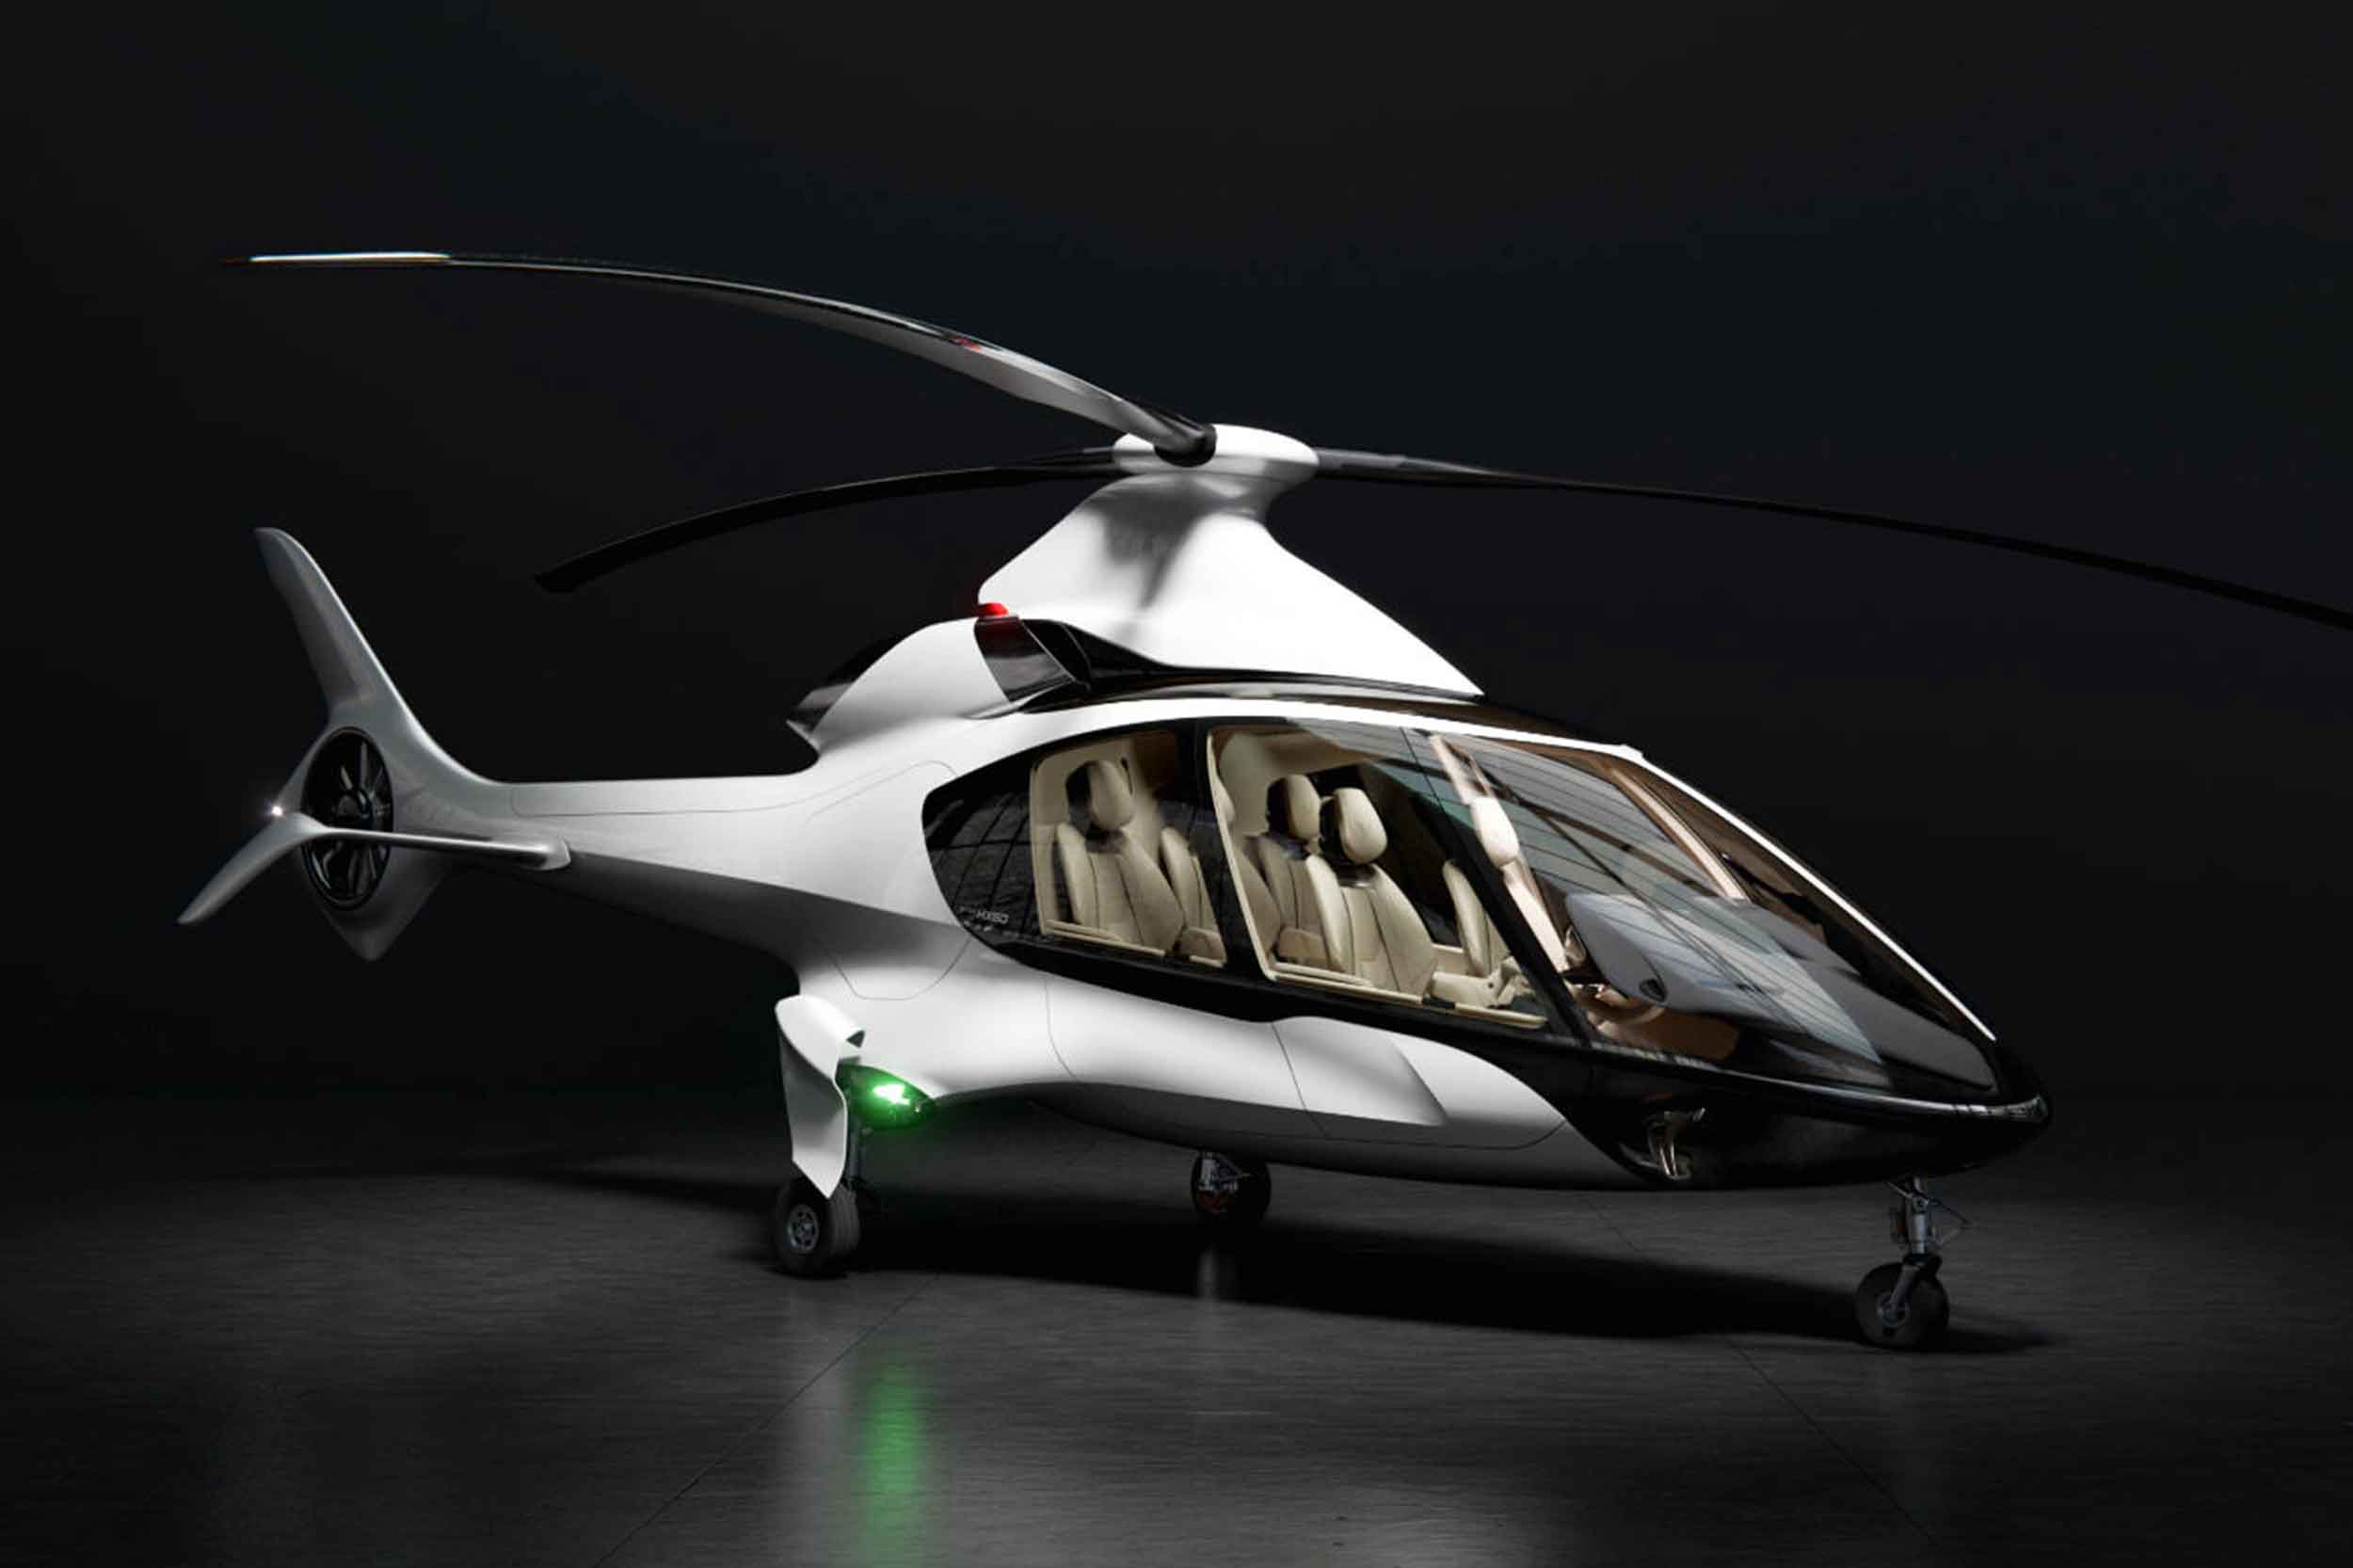 Revealed! The Hill HX50 helicopter, fitted with wheeled undercarriage